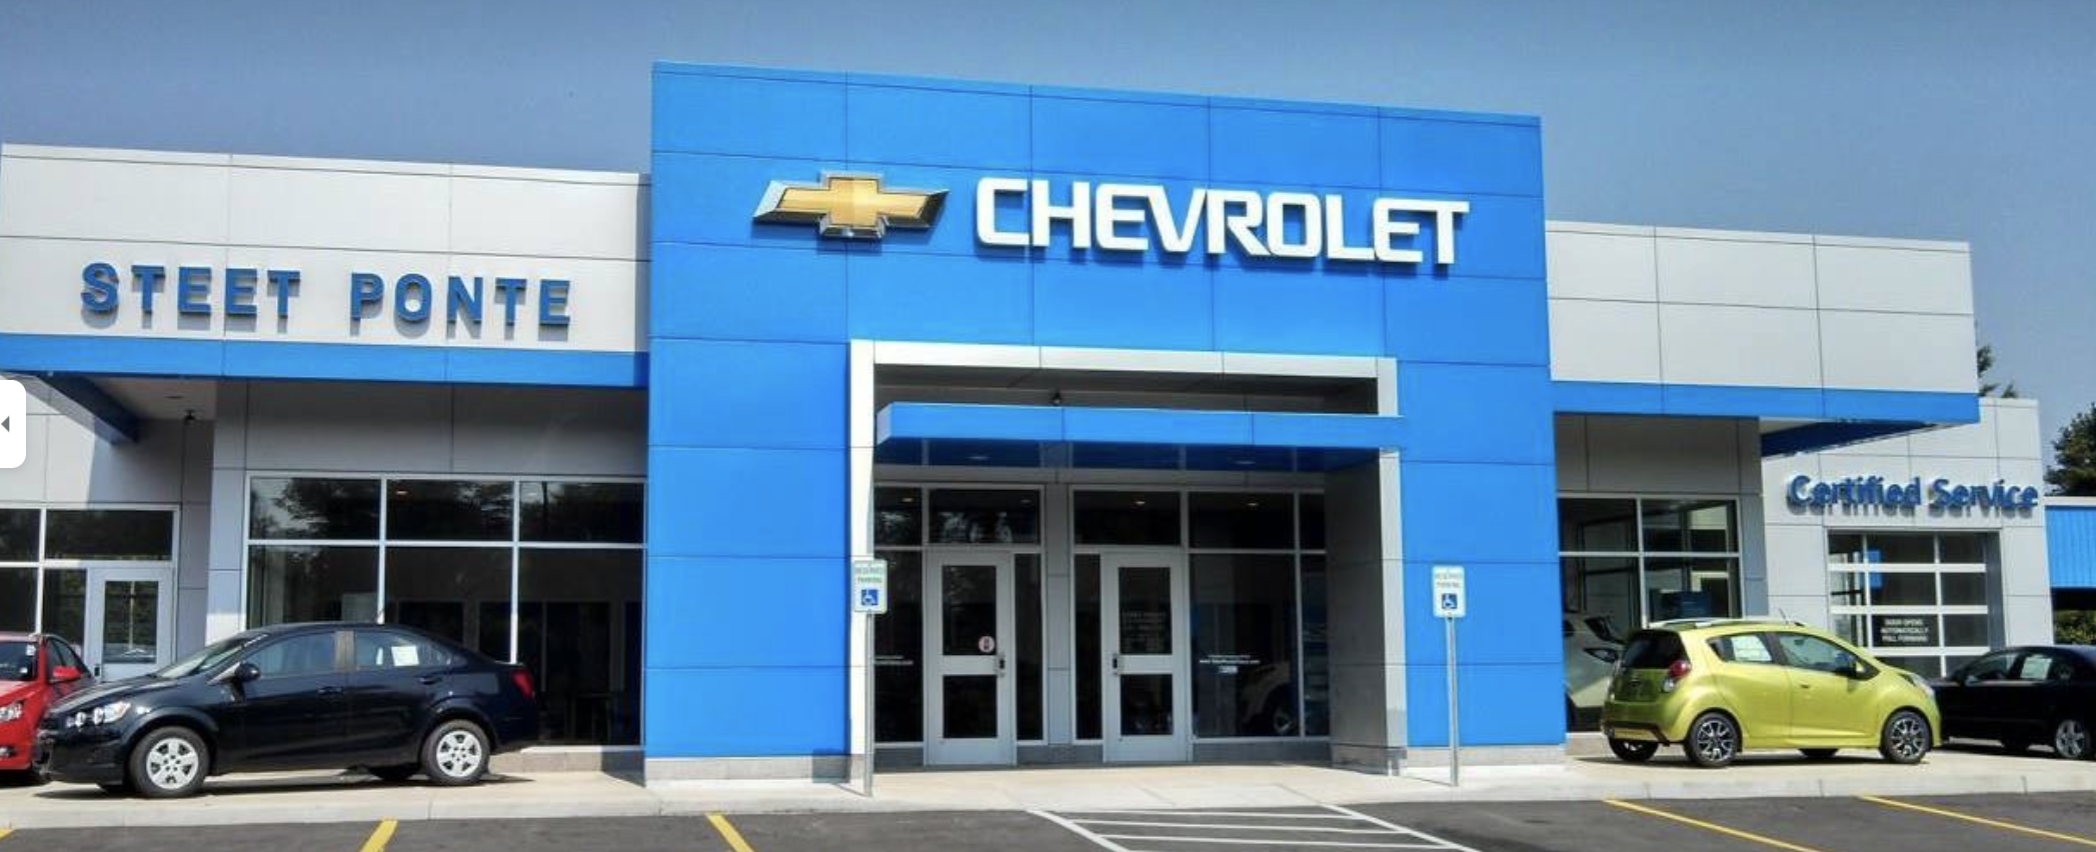 Steet Ponte Chevy located at 3036 State Route 28 in Herkimer, NY!